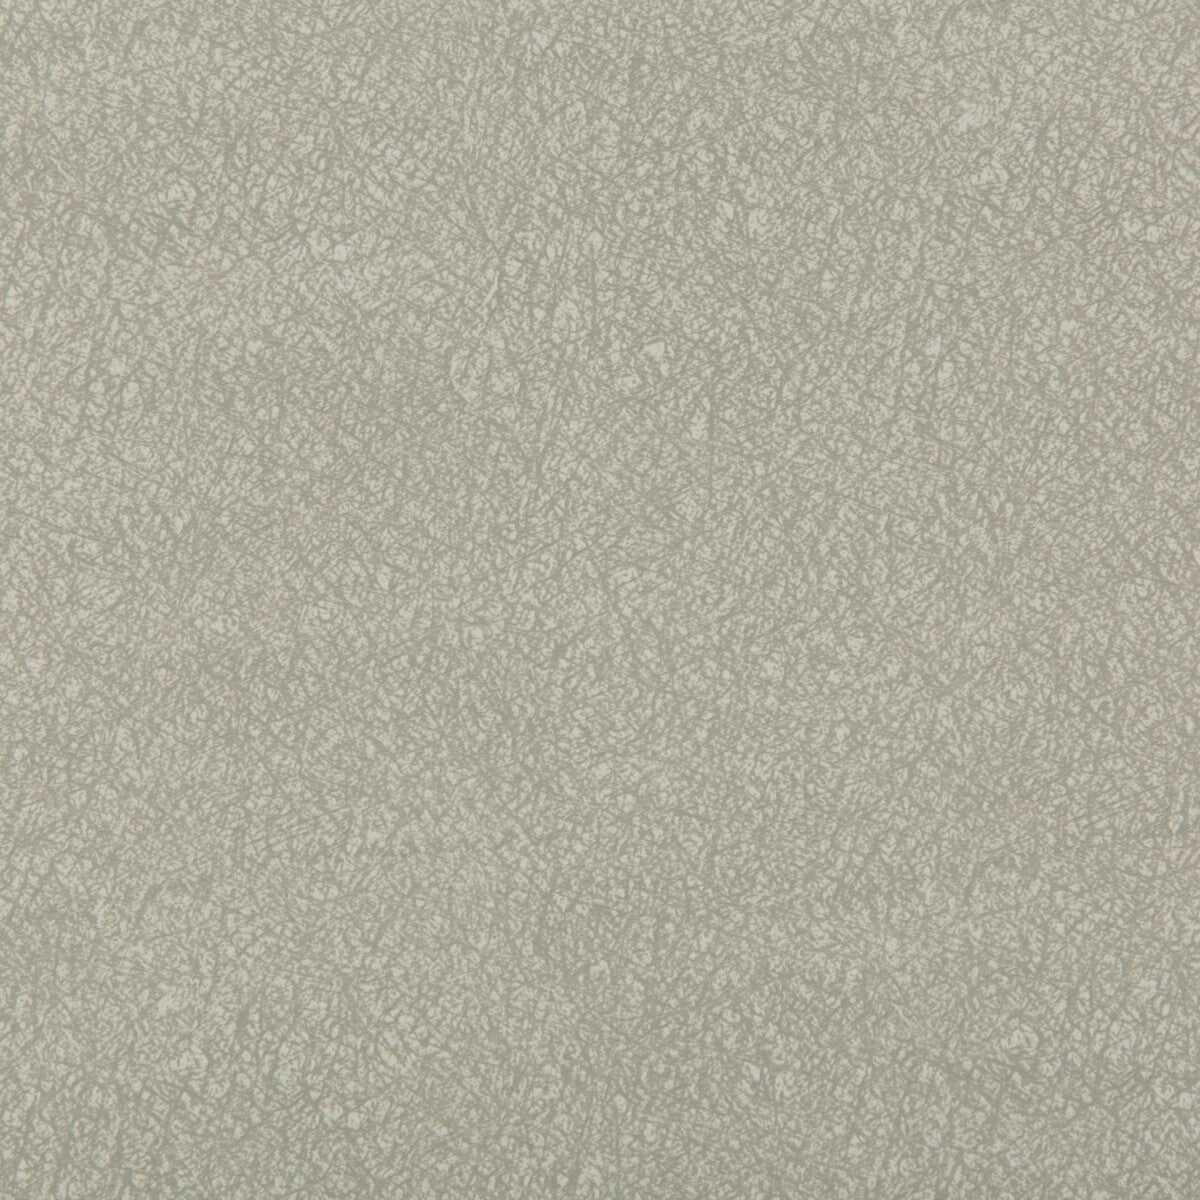 Ames fabric in granite color - pattern AMES.11.0 - by Kravet Contract